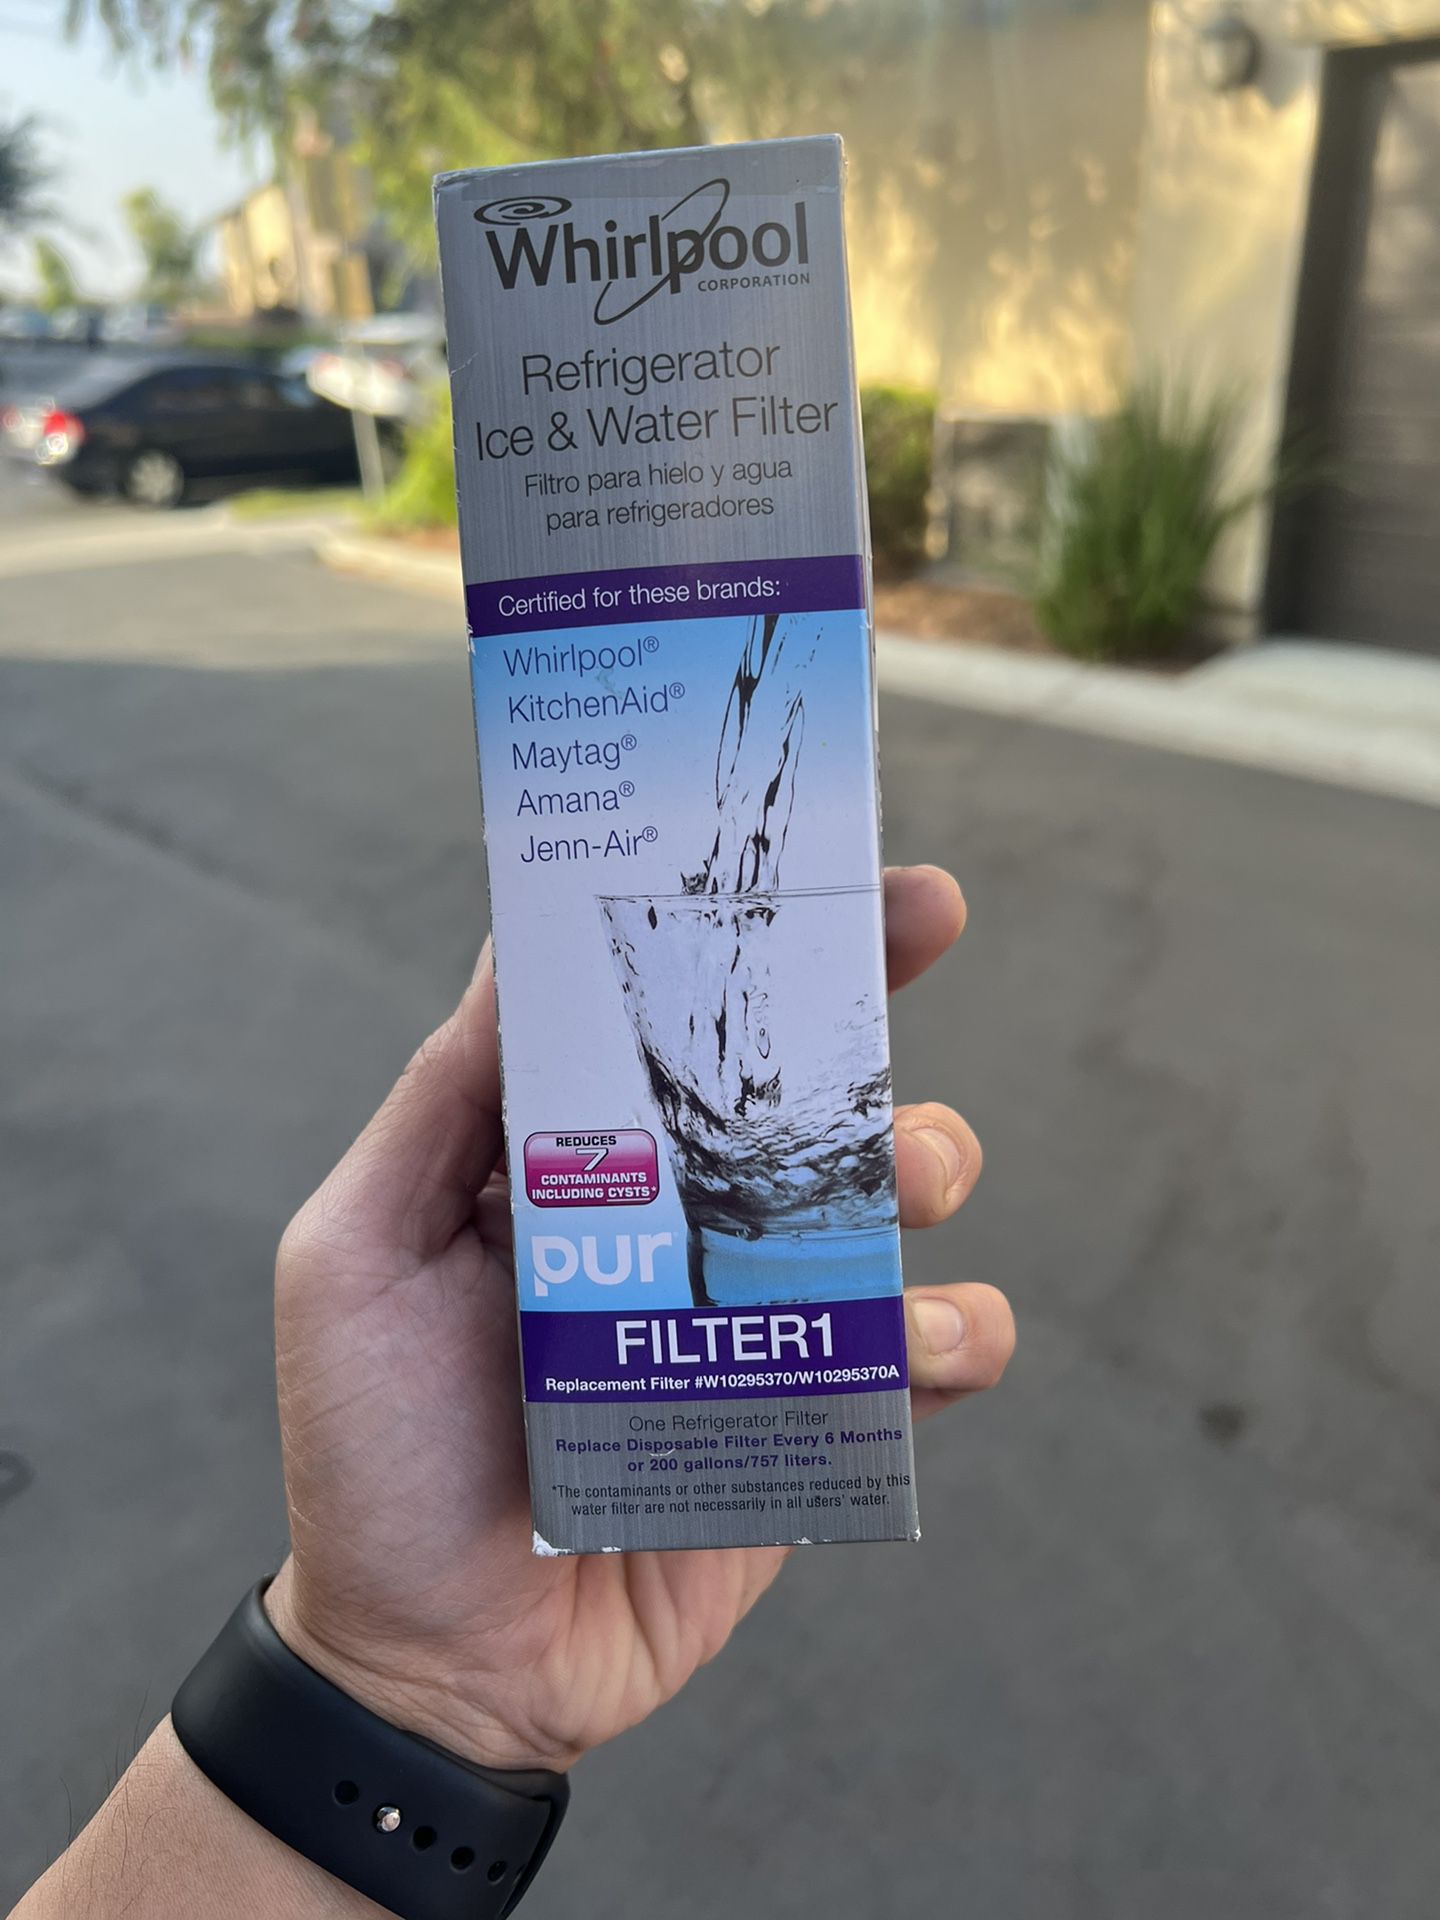 BRAND NEW: 1x Whirlpool W10295370/W10295370A Pur Filter1 Refrigerator Water Filter 